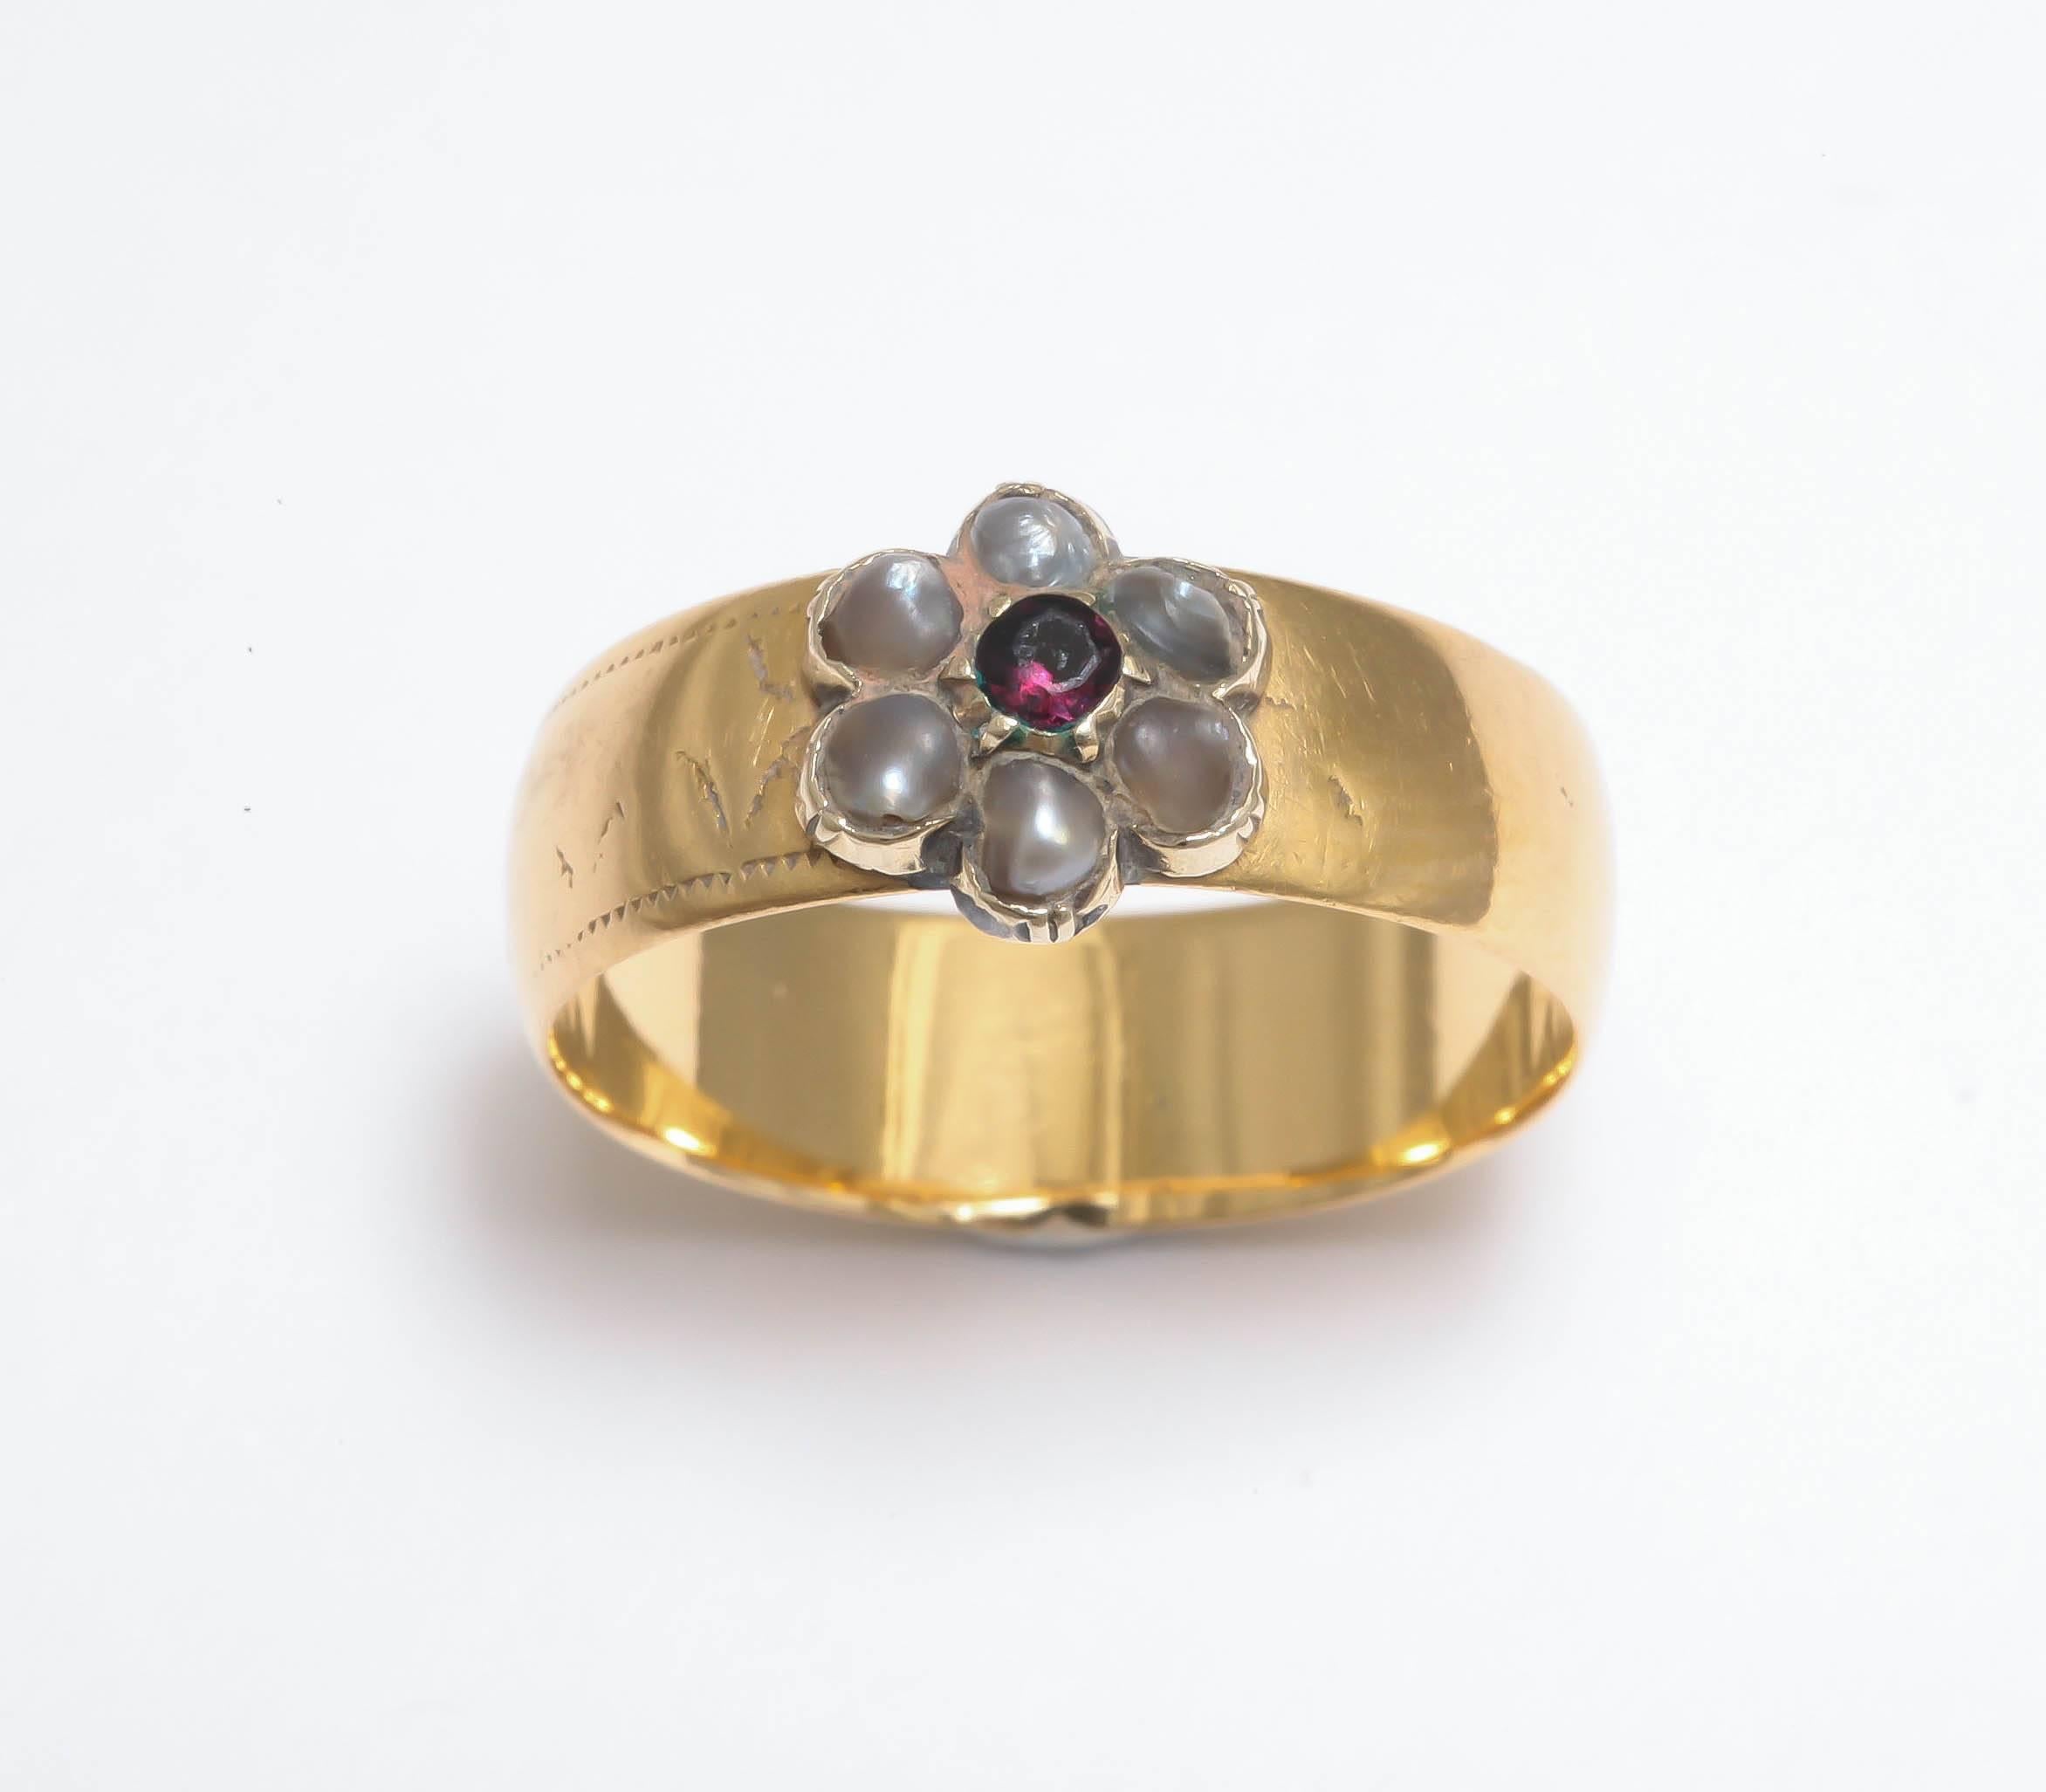 The Georgian or Victorian ring of classic daisy design, the smooth 18k gold band with a seed pearl and garnet flower.

Birmingham, 19th century, fully hallmarked.

Width of band: ¼ in. (0.65 cm); size 6.